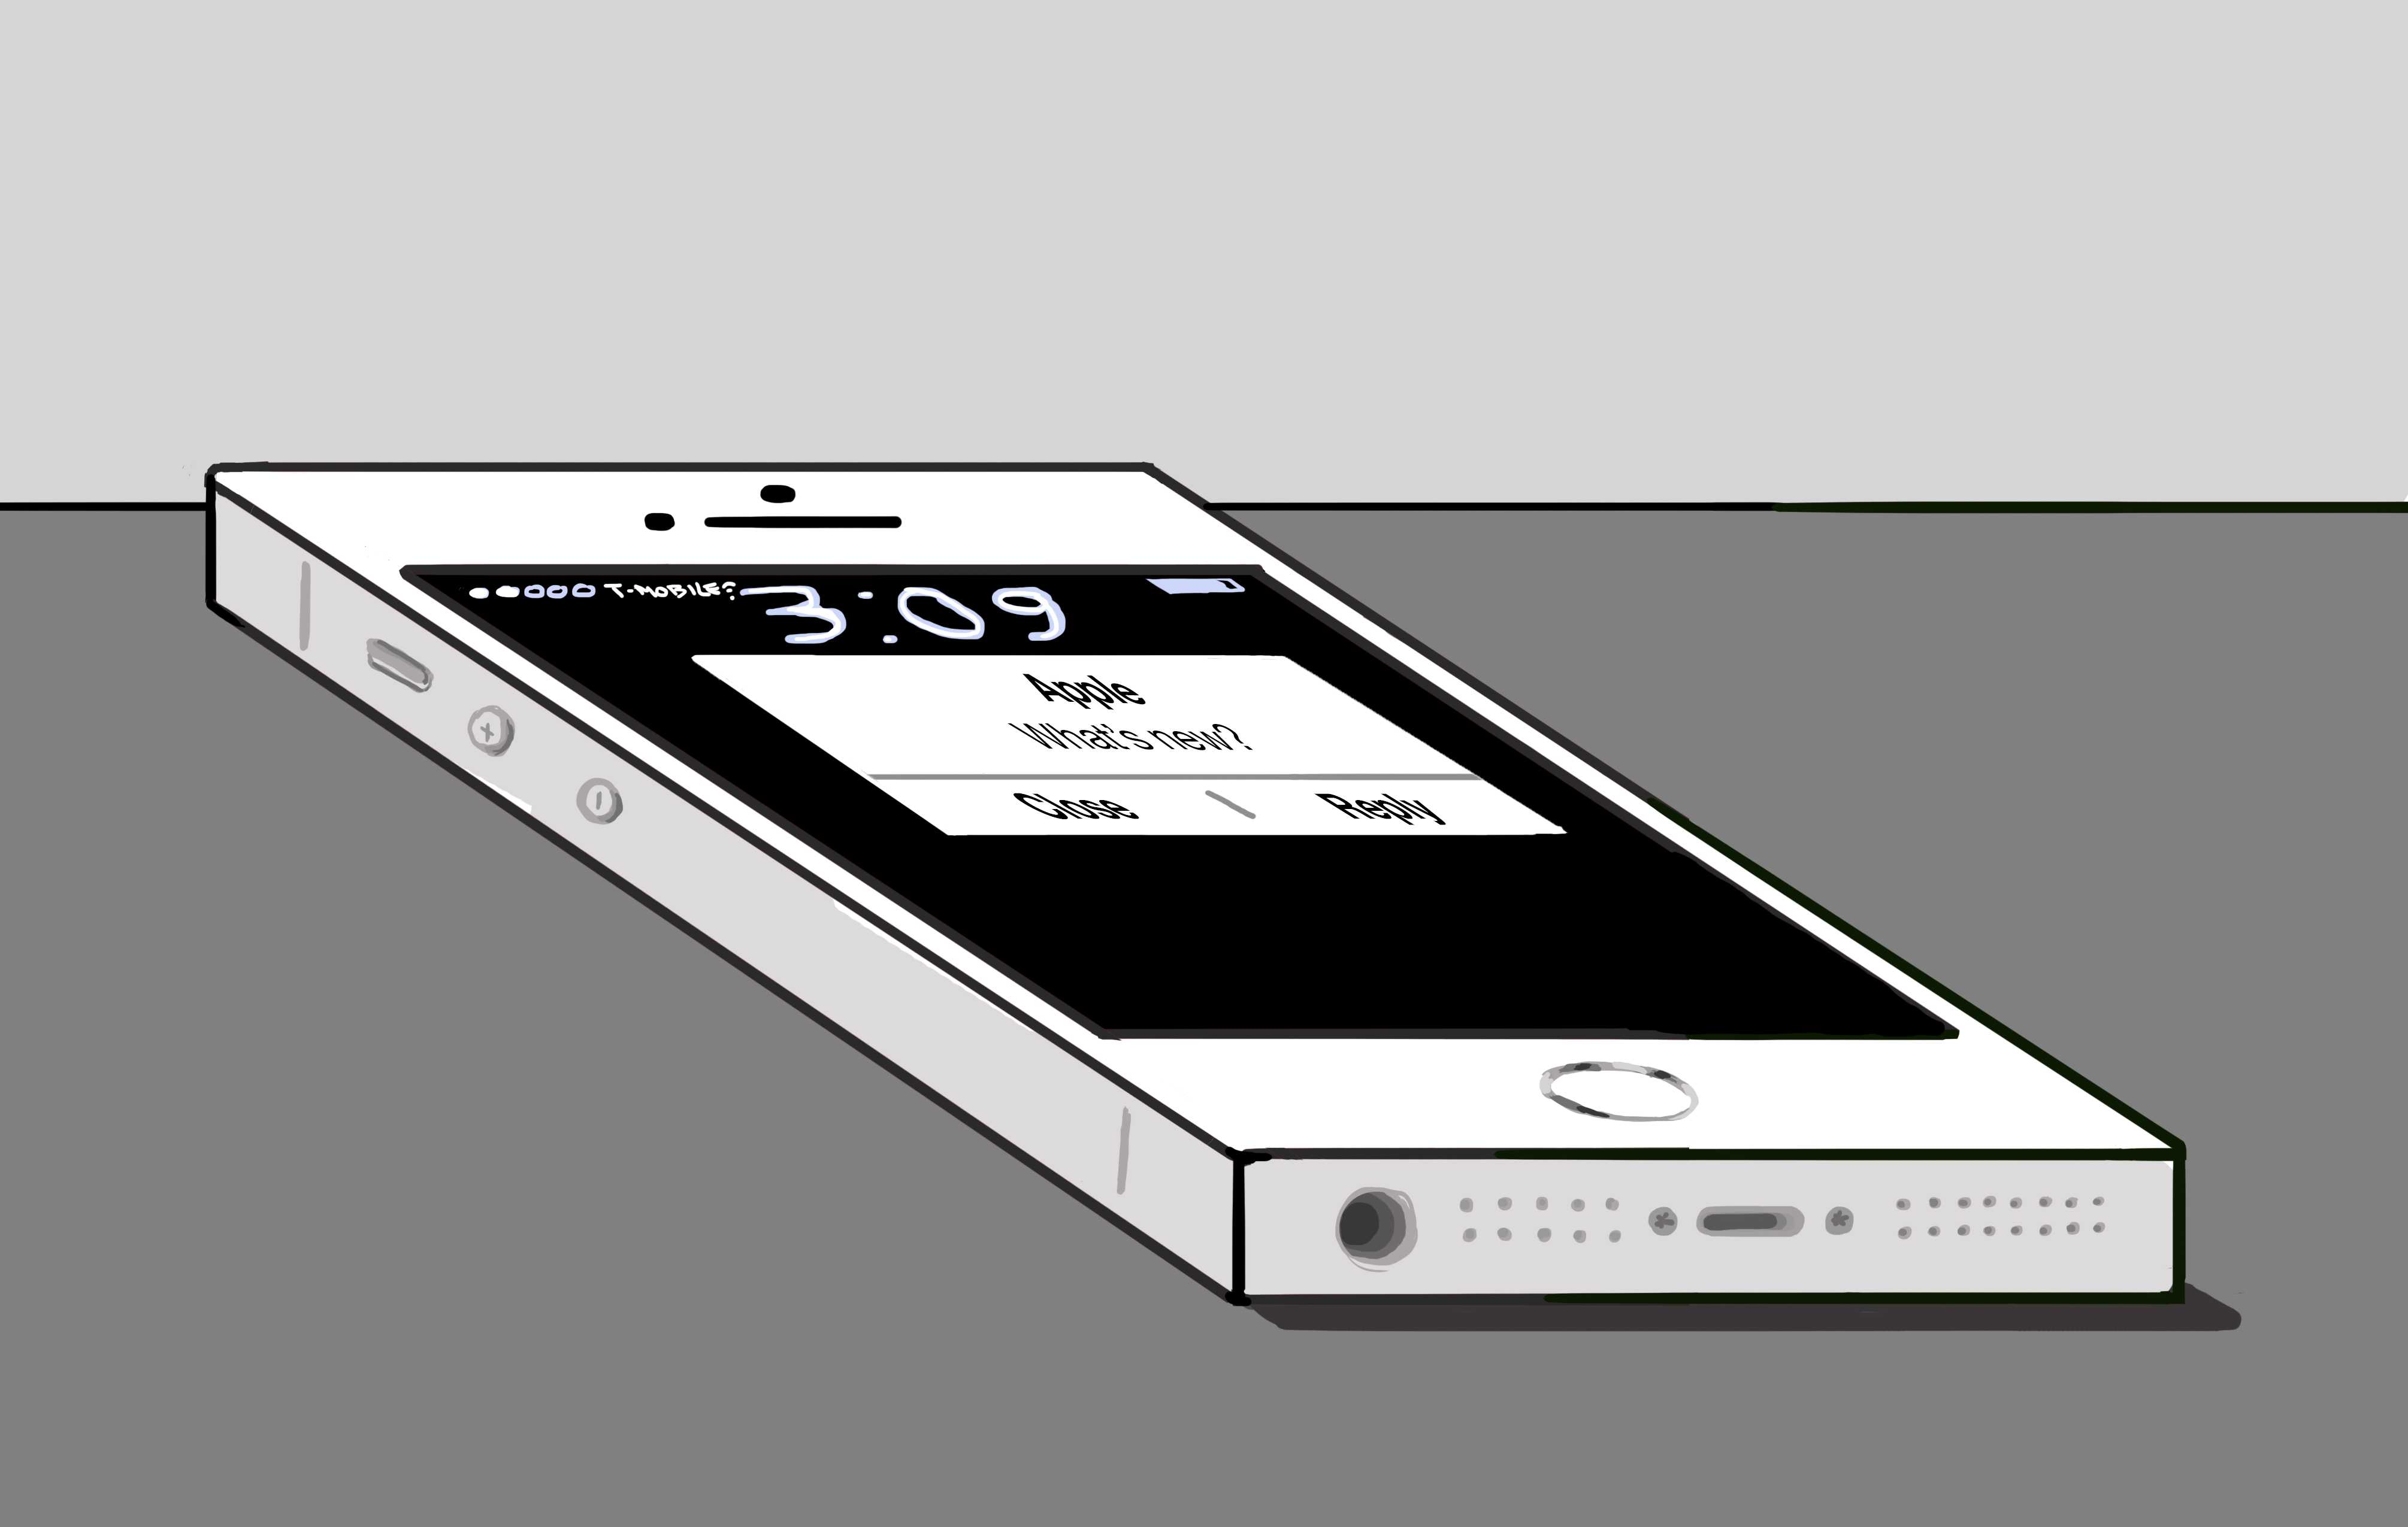 Illustration by Julienne Shih / Illustrator

Image shows a drawing of an Iphone with a message that reads, Whats New?